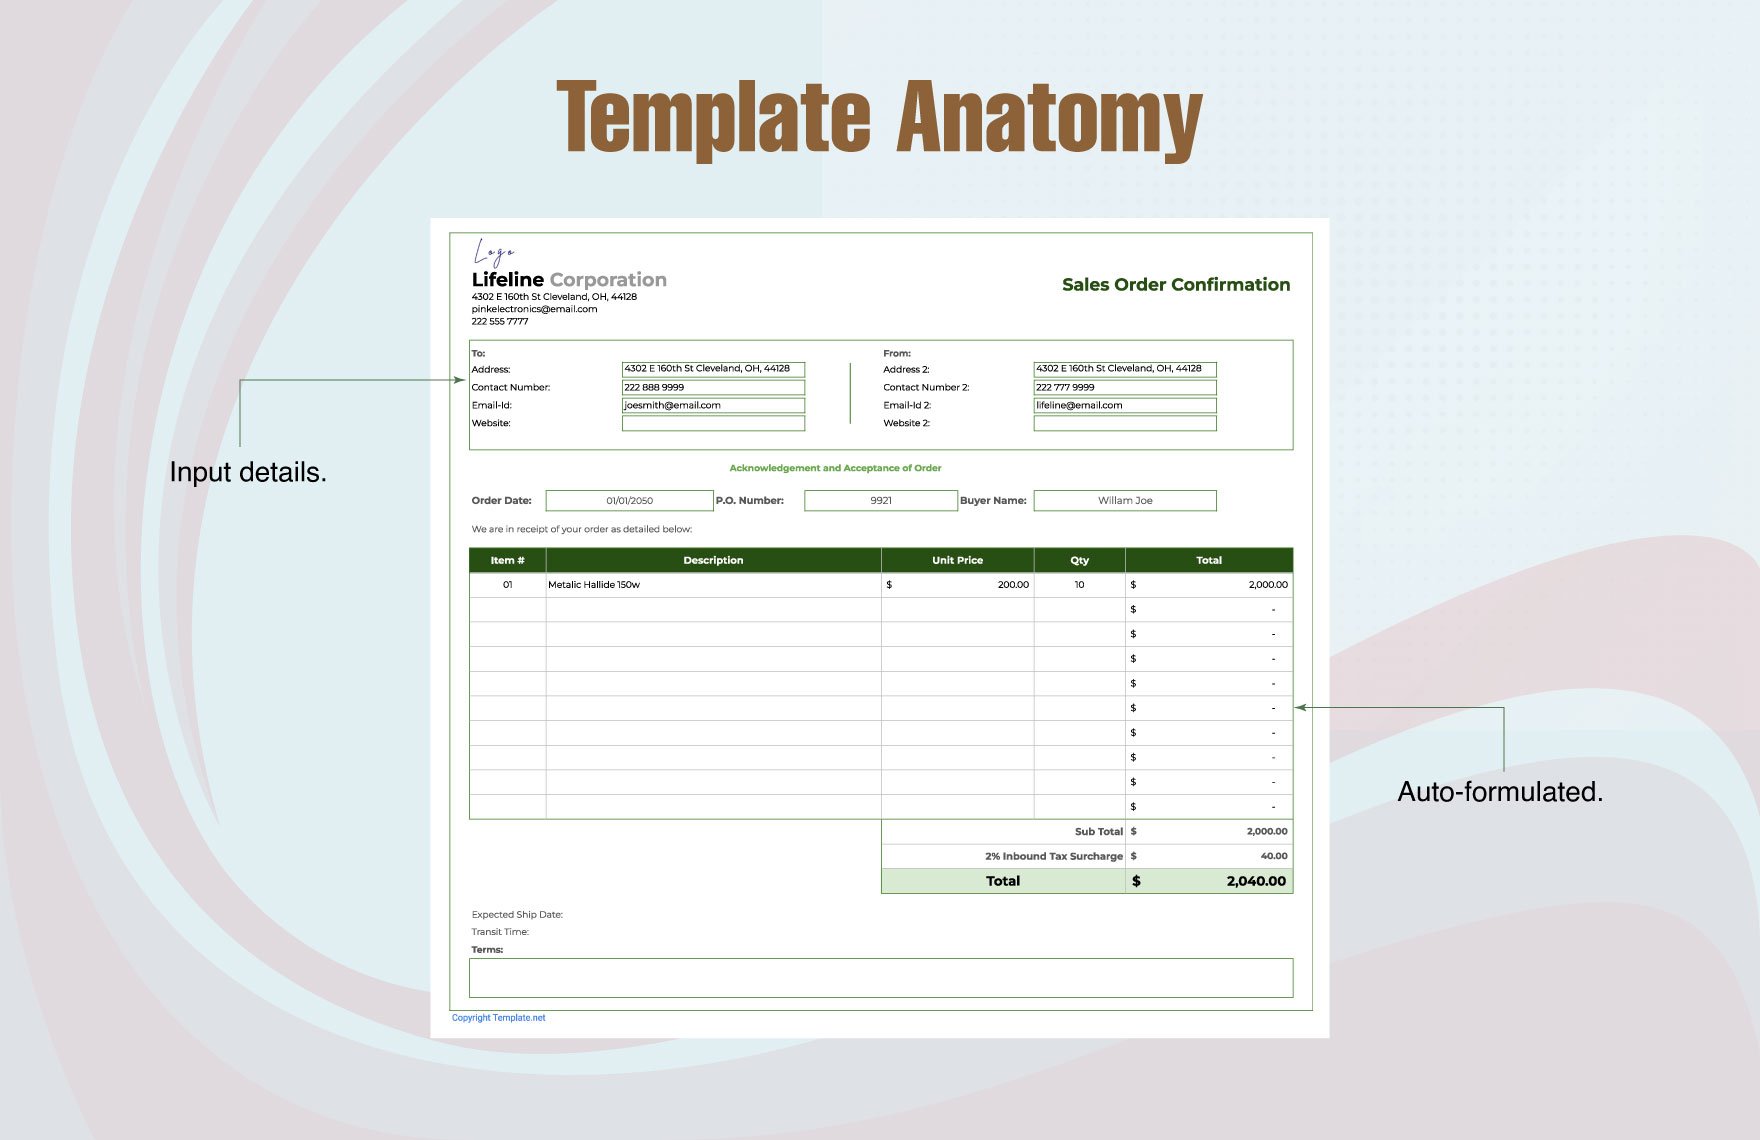 Sales Order Confirmation Template